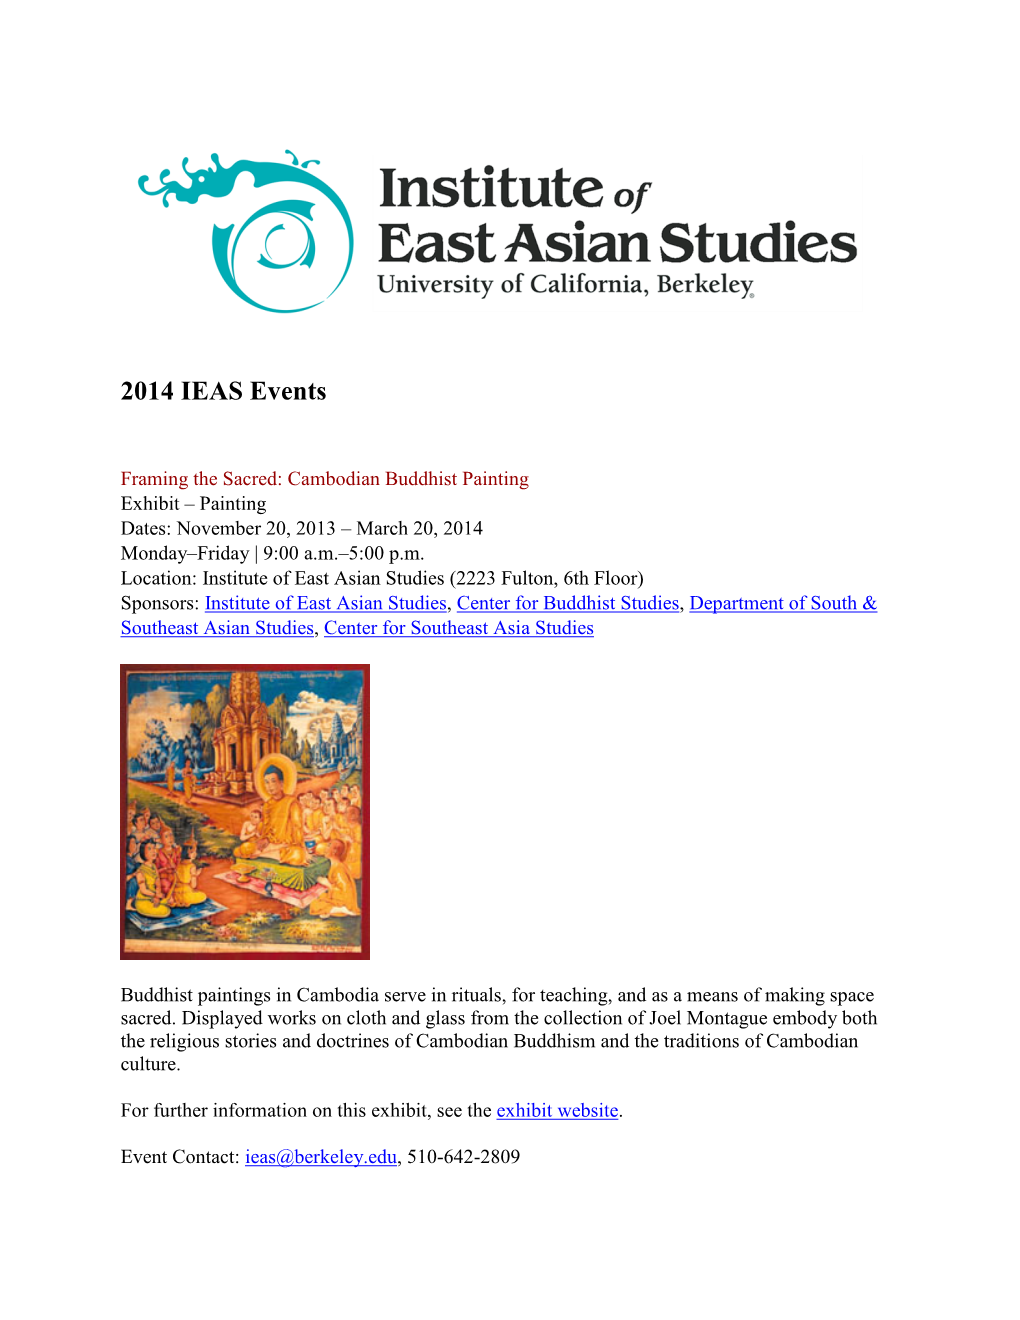 PDF of 2014 IEAS EVENTS